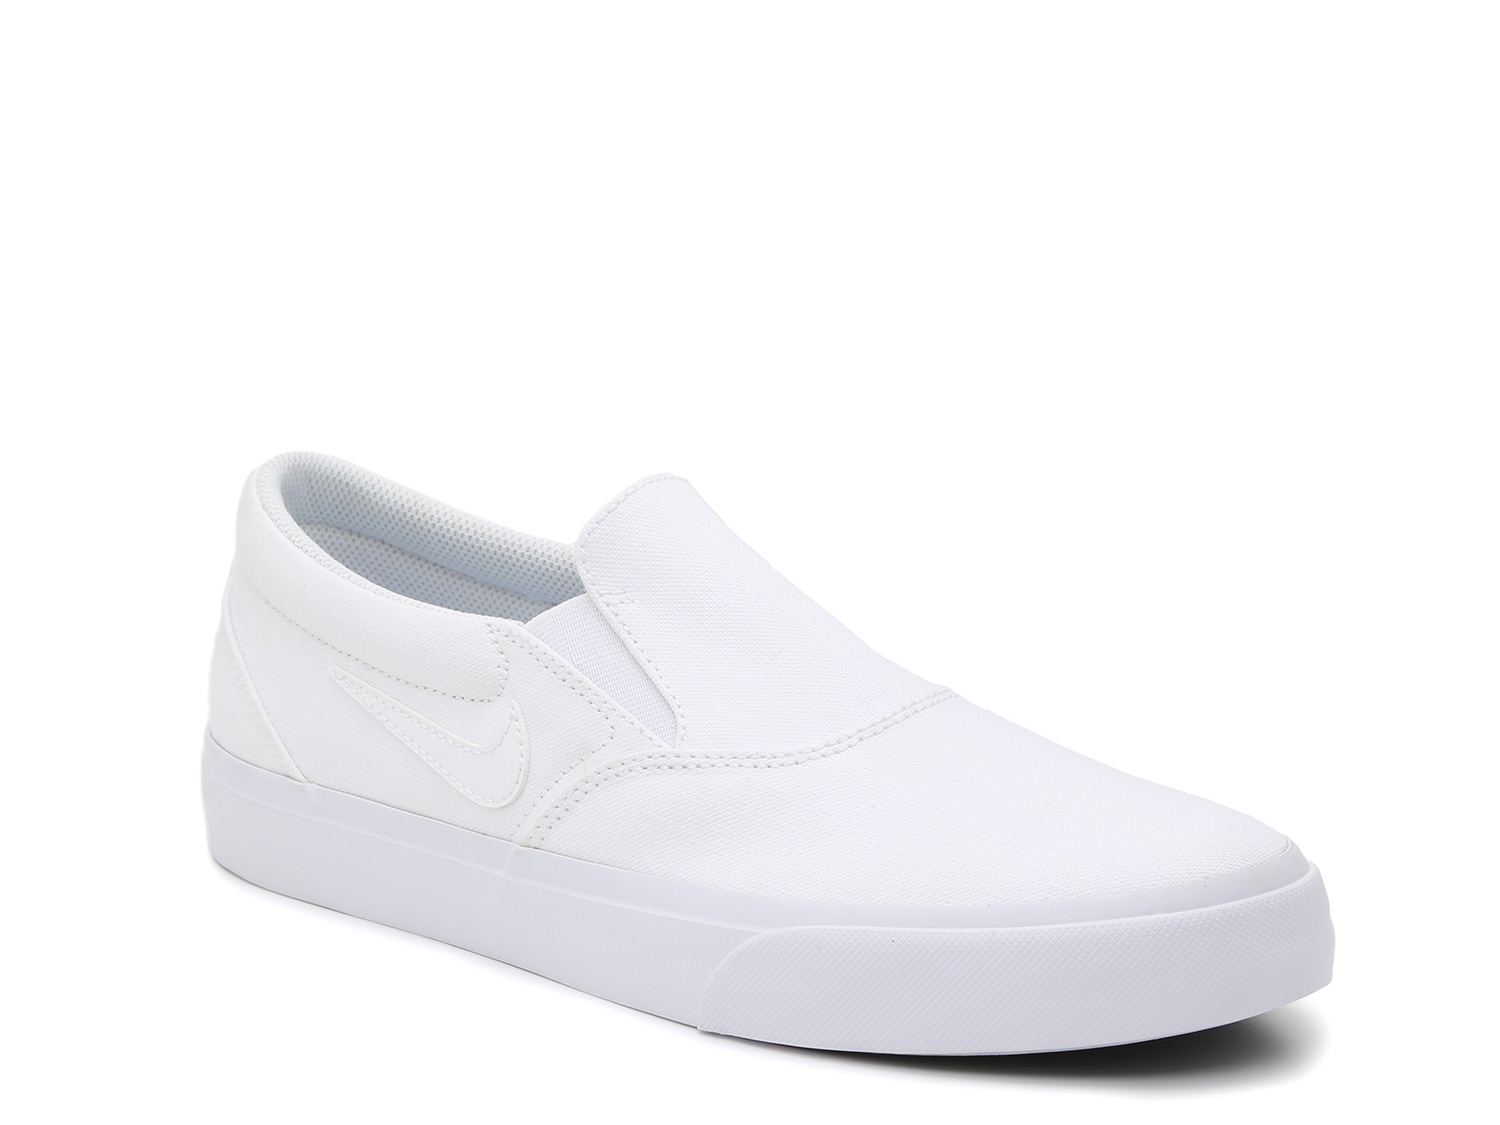 dsw mens white shoes